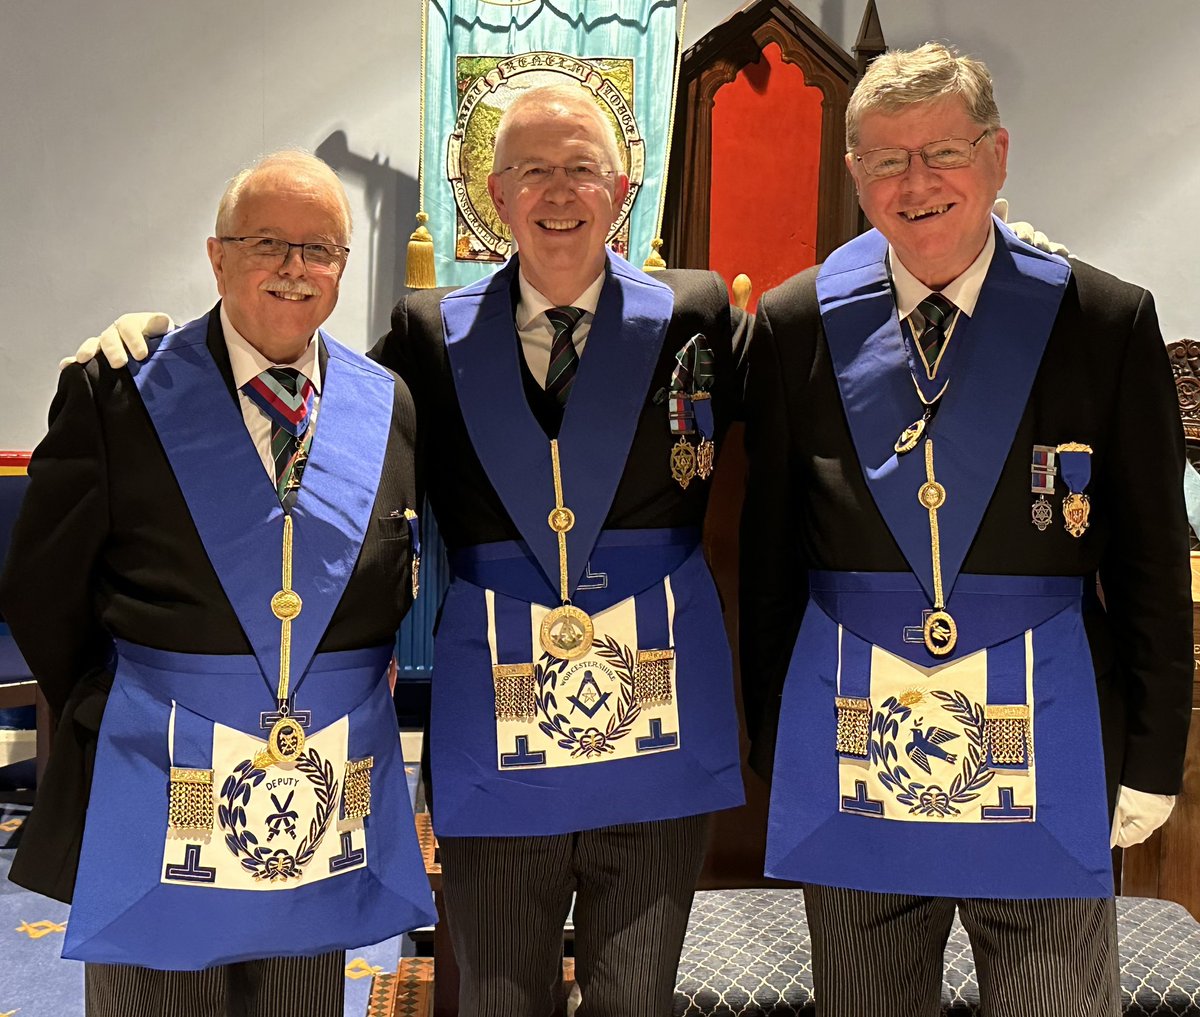 And on this special evening great to see the ProvGM of the Craft, RW Bro Stephen Wyer @StephenWyer, MEGS E Comp John Phenix @Phlight56 and ProvGM of the Mark, RW Bro Eric Rymer enjoying the occasion.